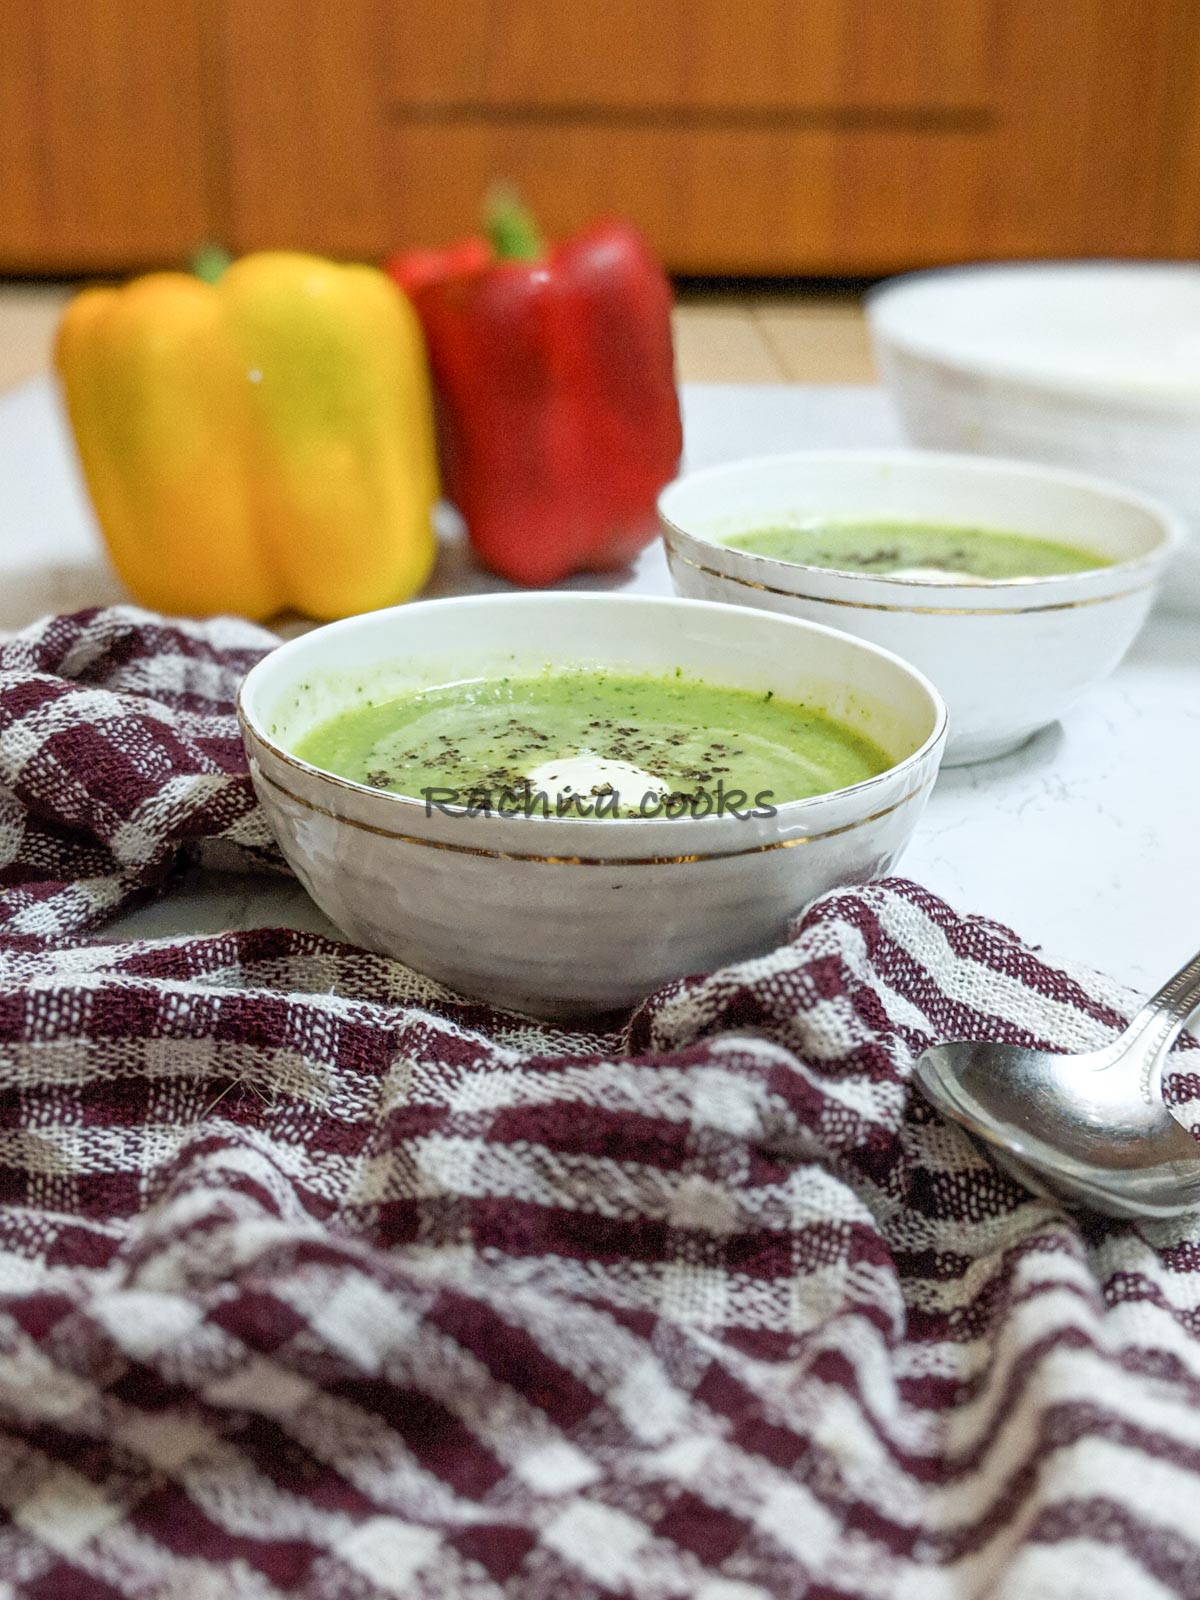 Delicious green zucchini soup in bowls with a dollop of cream and garnished with pepper. Peppers in the background.